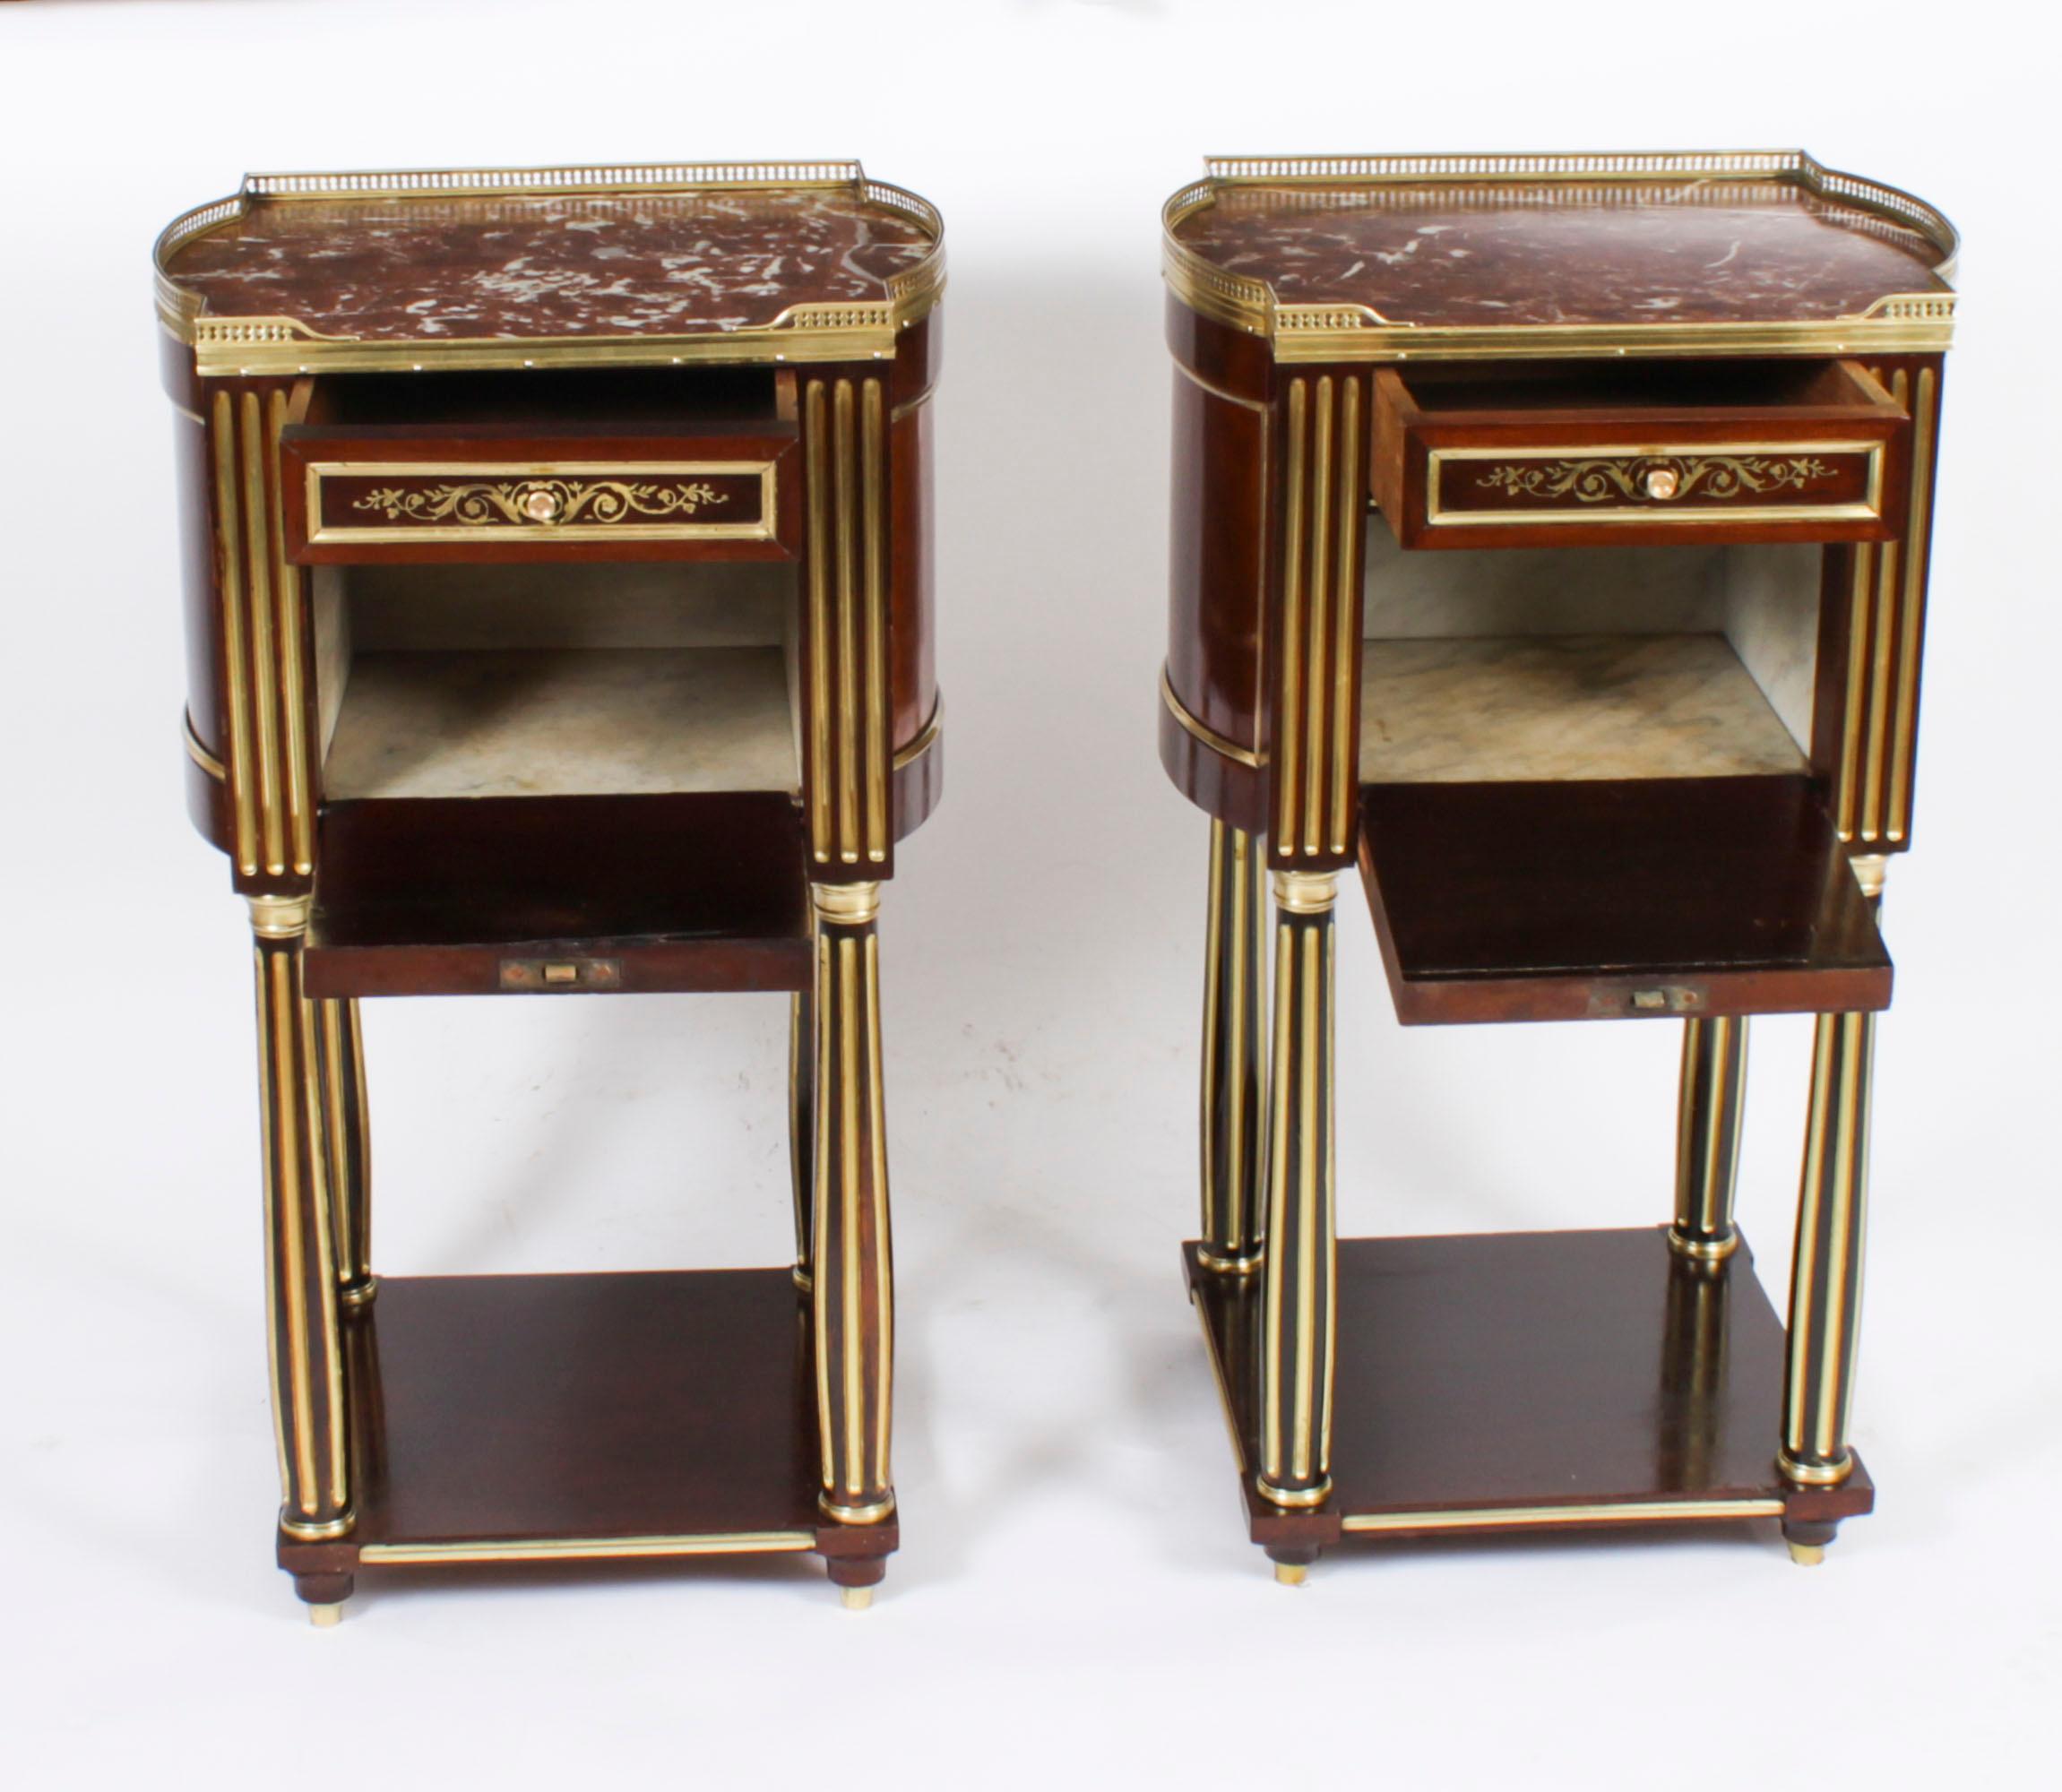 Antique Pair French Empire Mahogany Bedside Cabinets 19th Century In Good Condition For Sale In London, GB